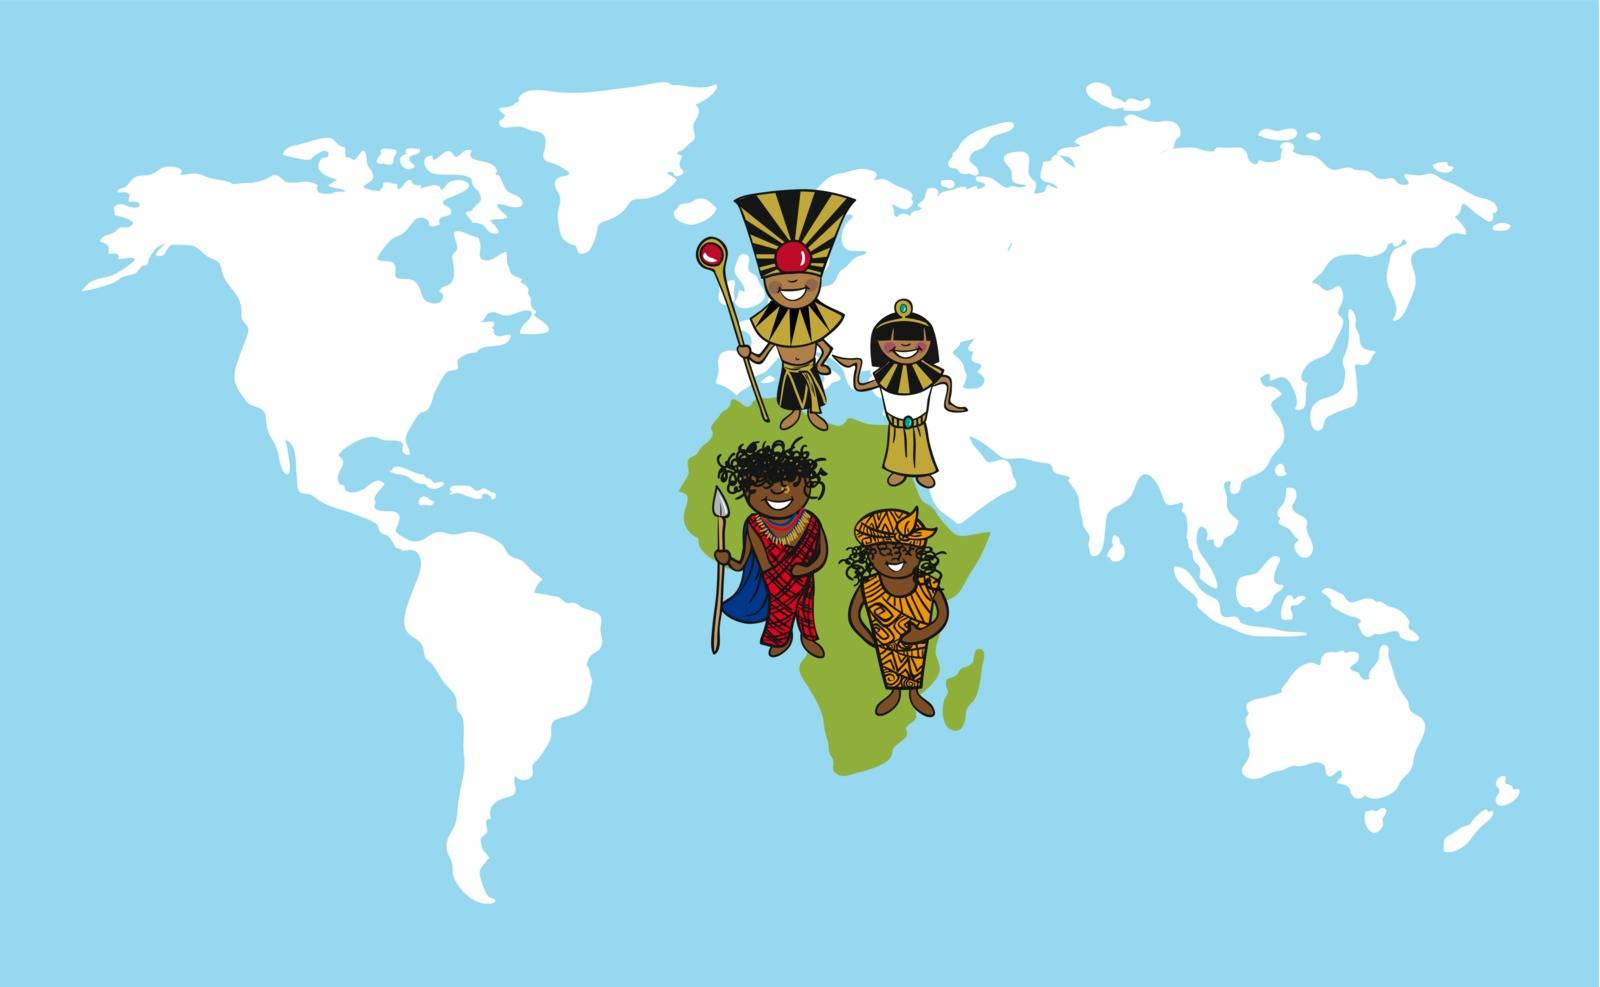 Africa people cartoons world map diversity illustration. by cienpies